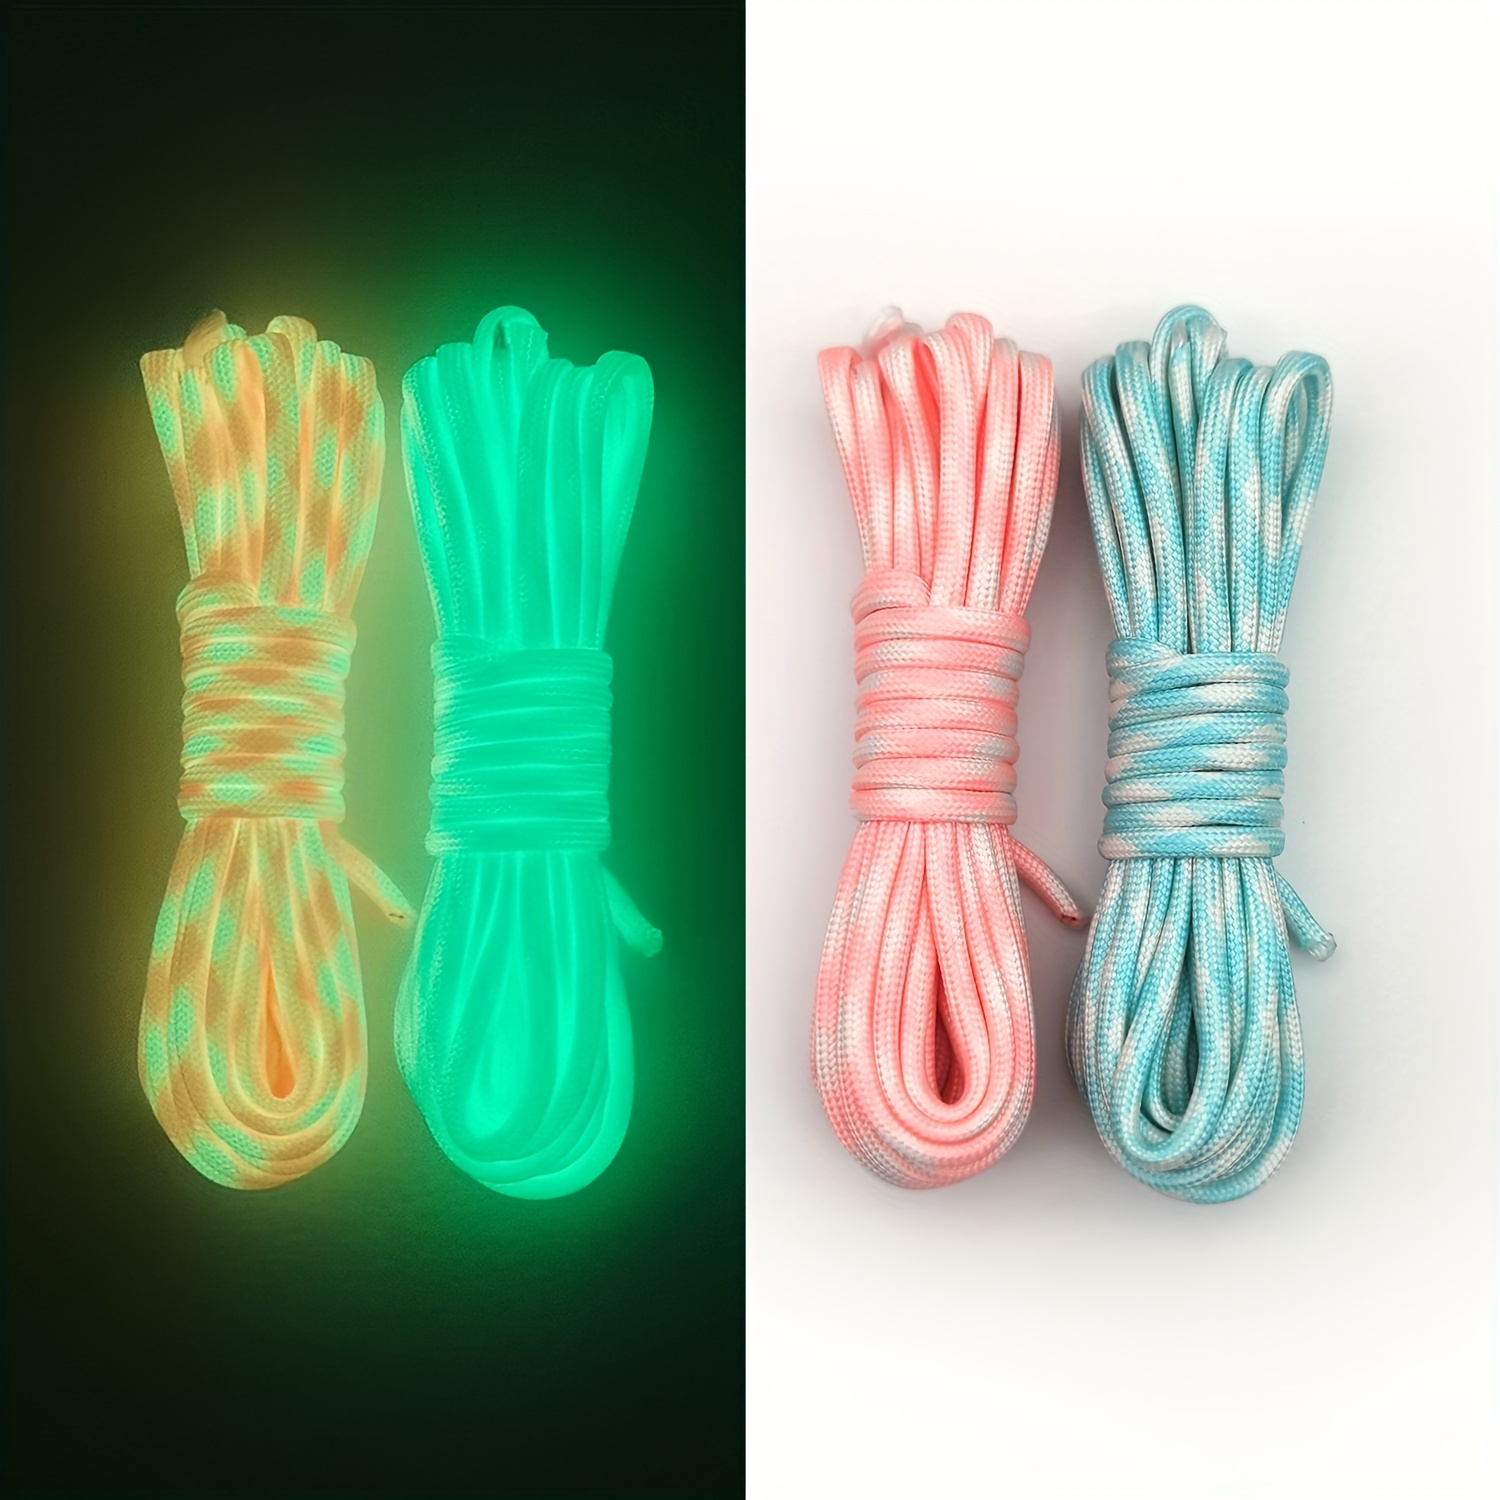 9-core Night Luminous Paracord 550 Glow In The Dark Cord For Outdoor  Binding